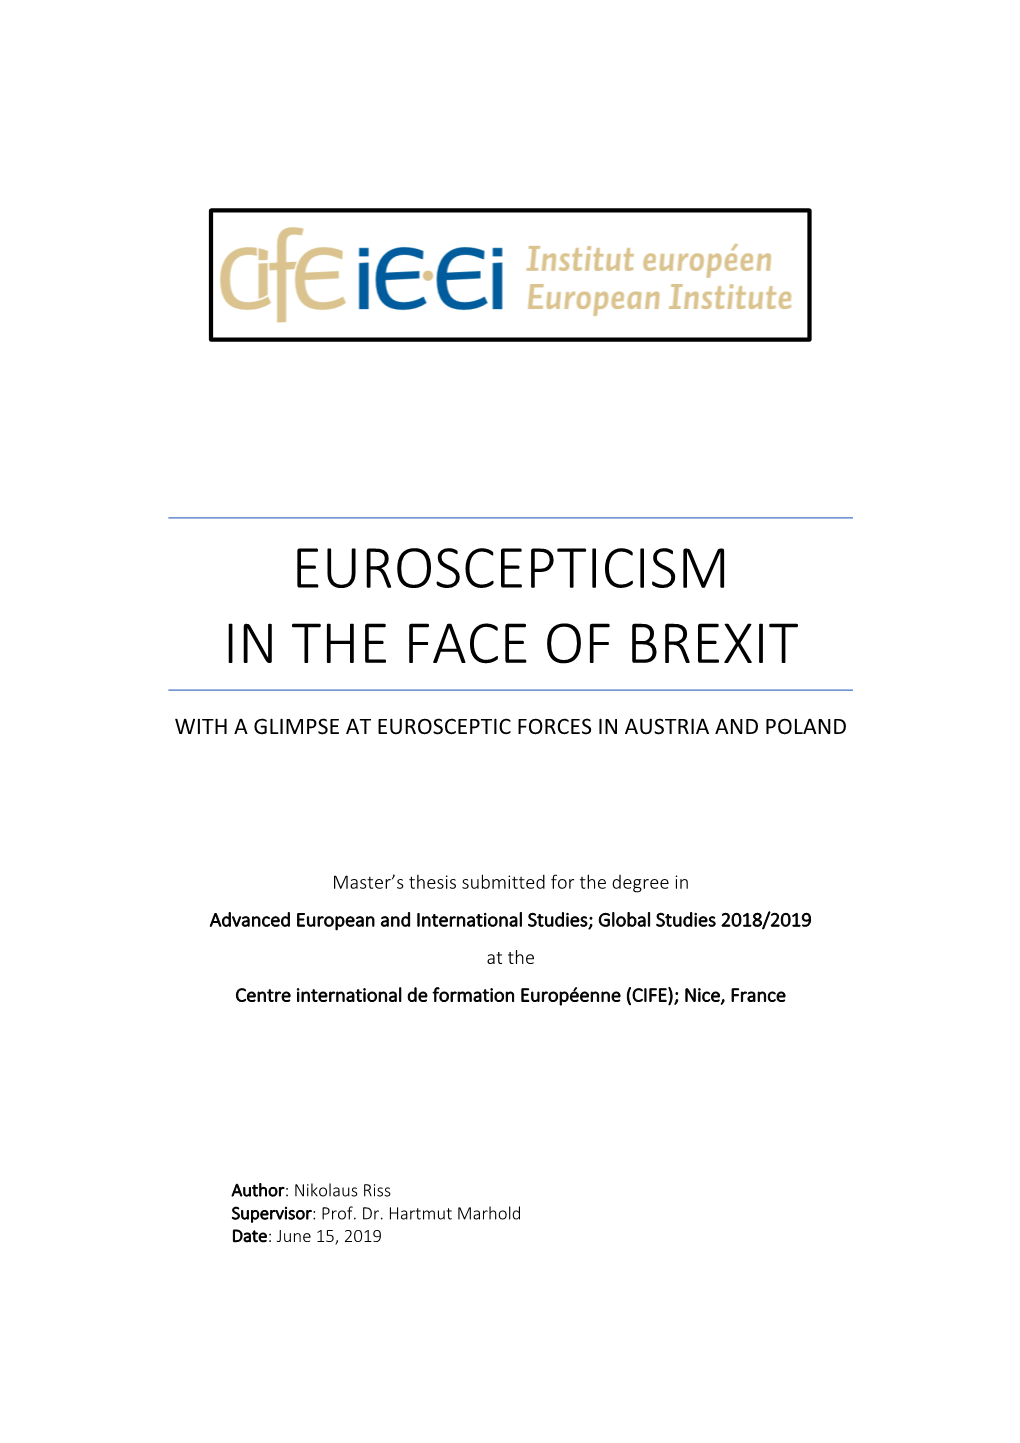 Euroscepticism in the Face of Brexit